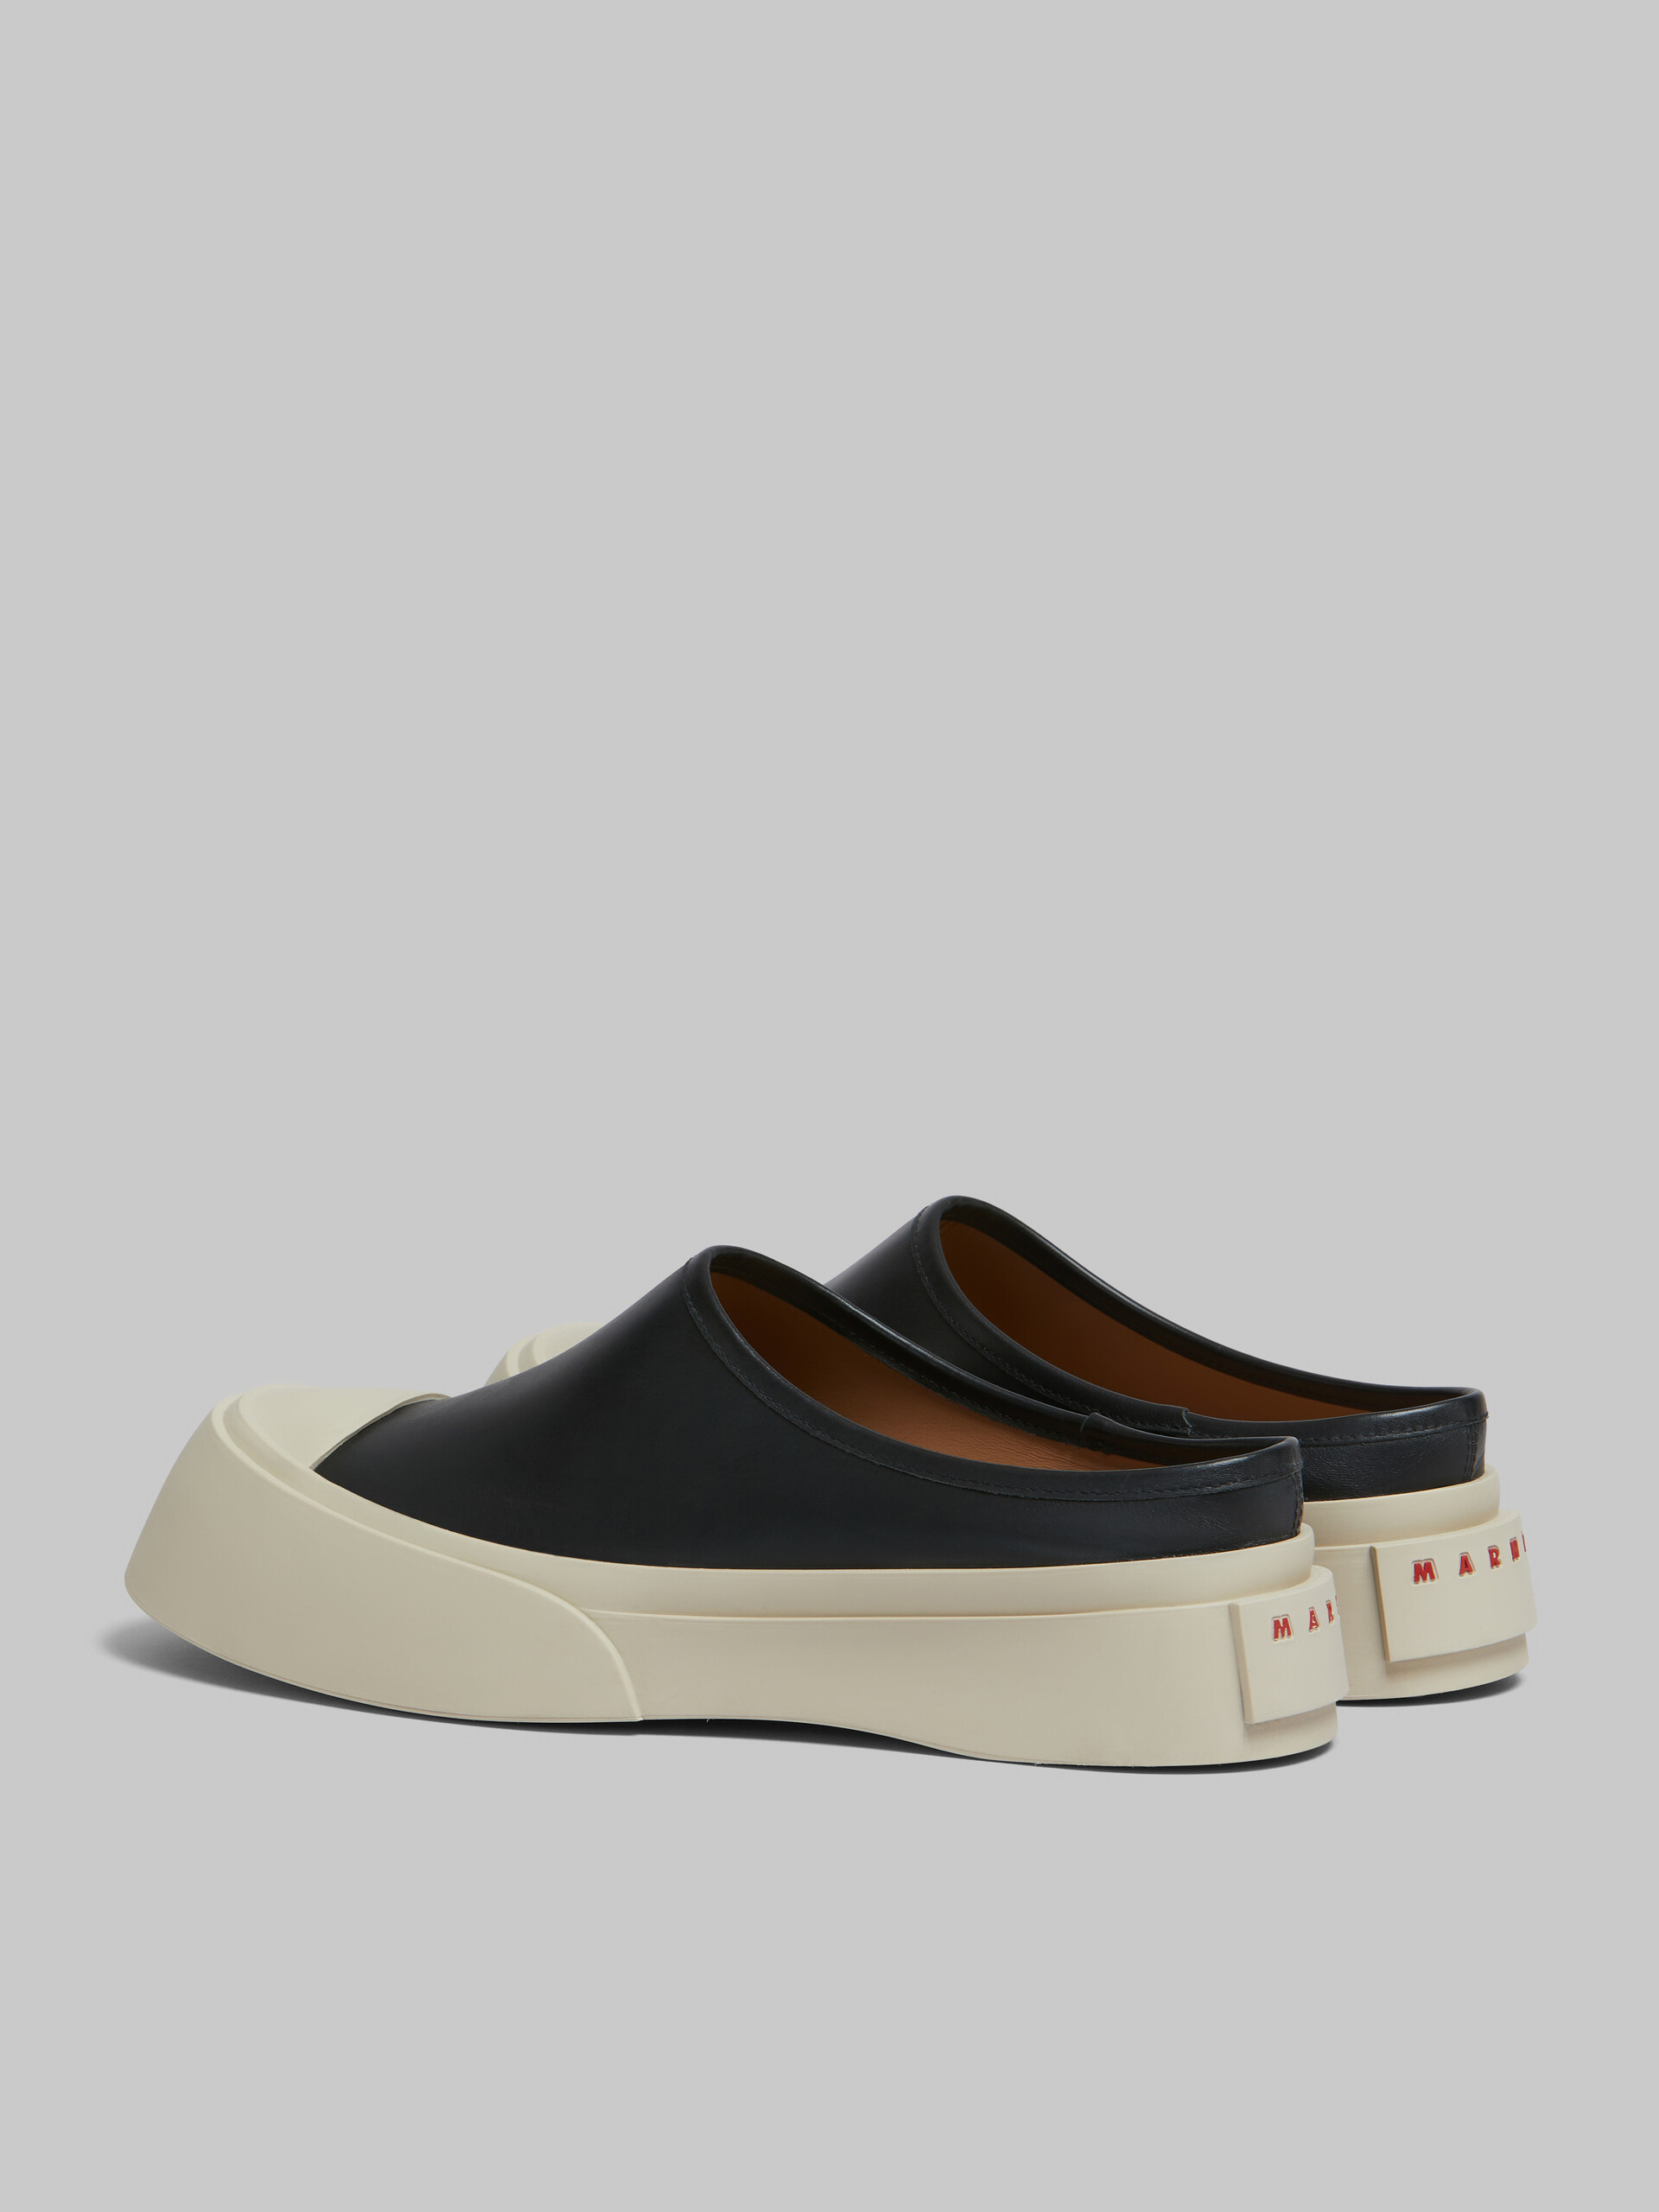 Grey leather Pablo sabot - Sneakers - Image 3